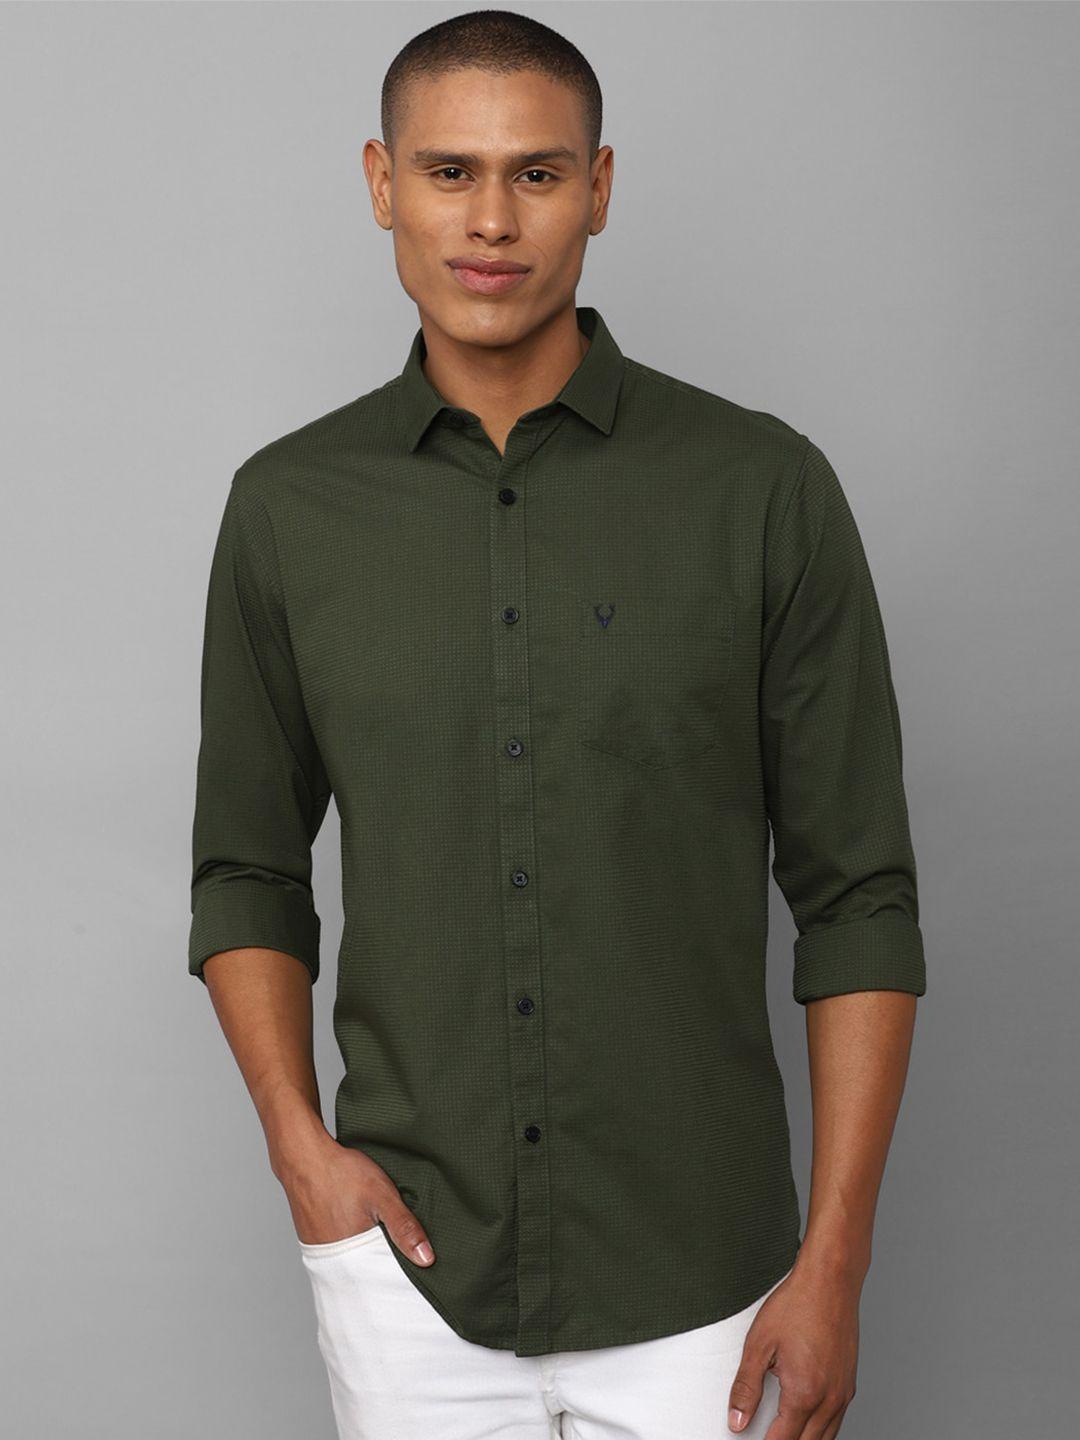 allen solly men olive green solid pure cotton casual shirt